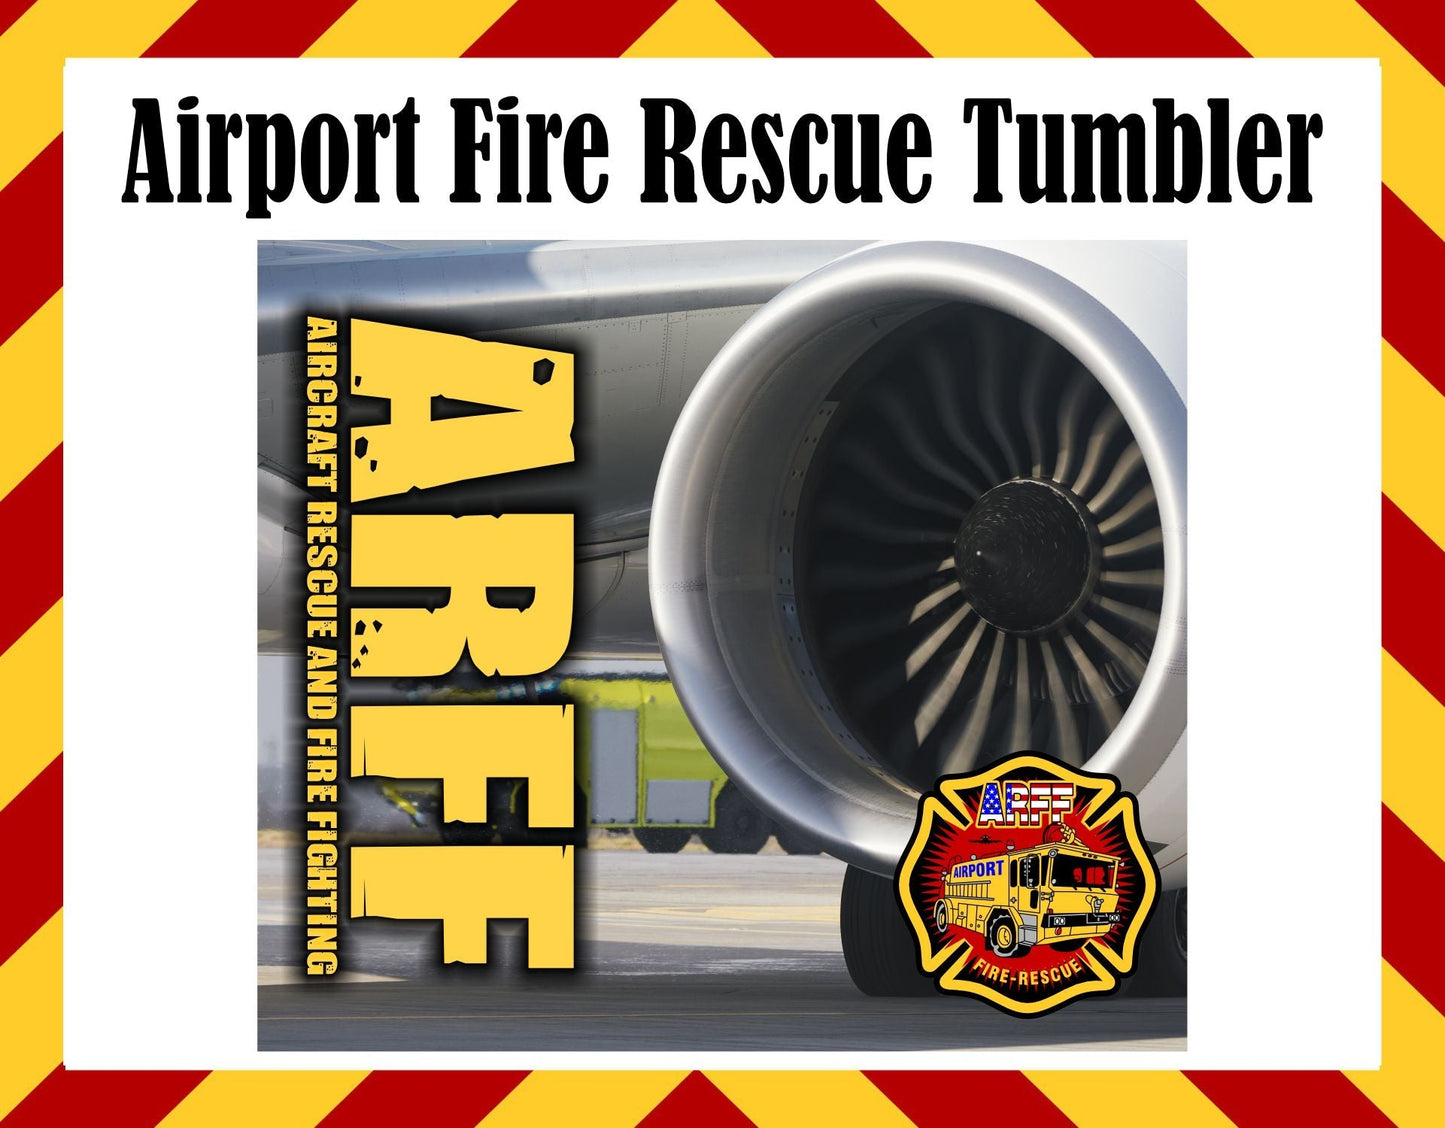 Stainless Steel Cup - ARFF Airport Firefighter Design Hot/Cold Cup